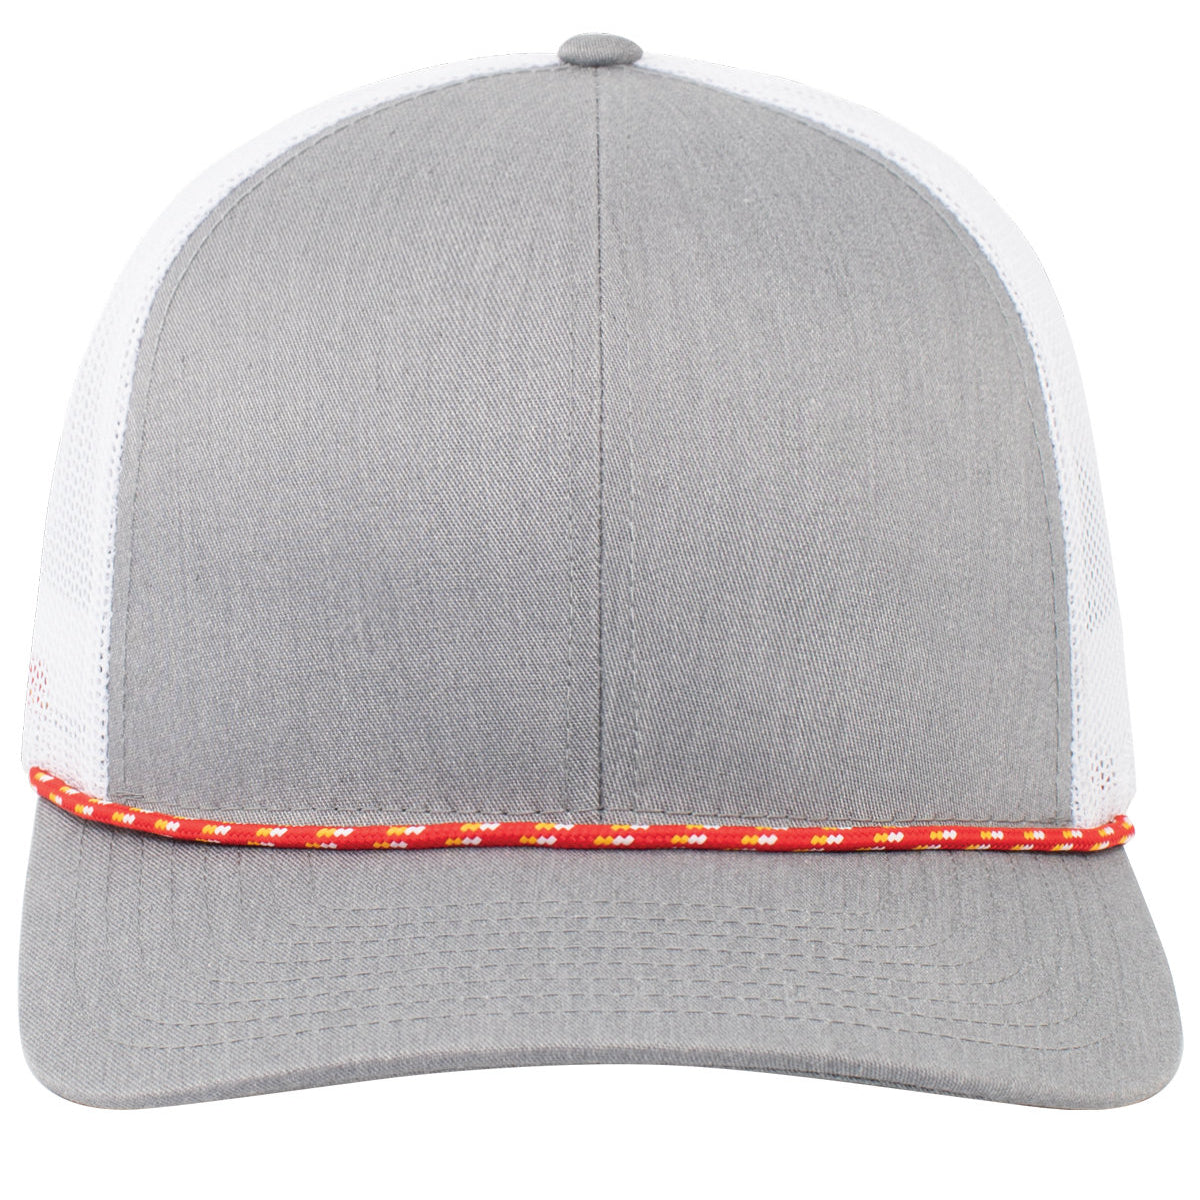 104BR-PacificHeadwear-CT-RED_HTGRY_WHT-OS